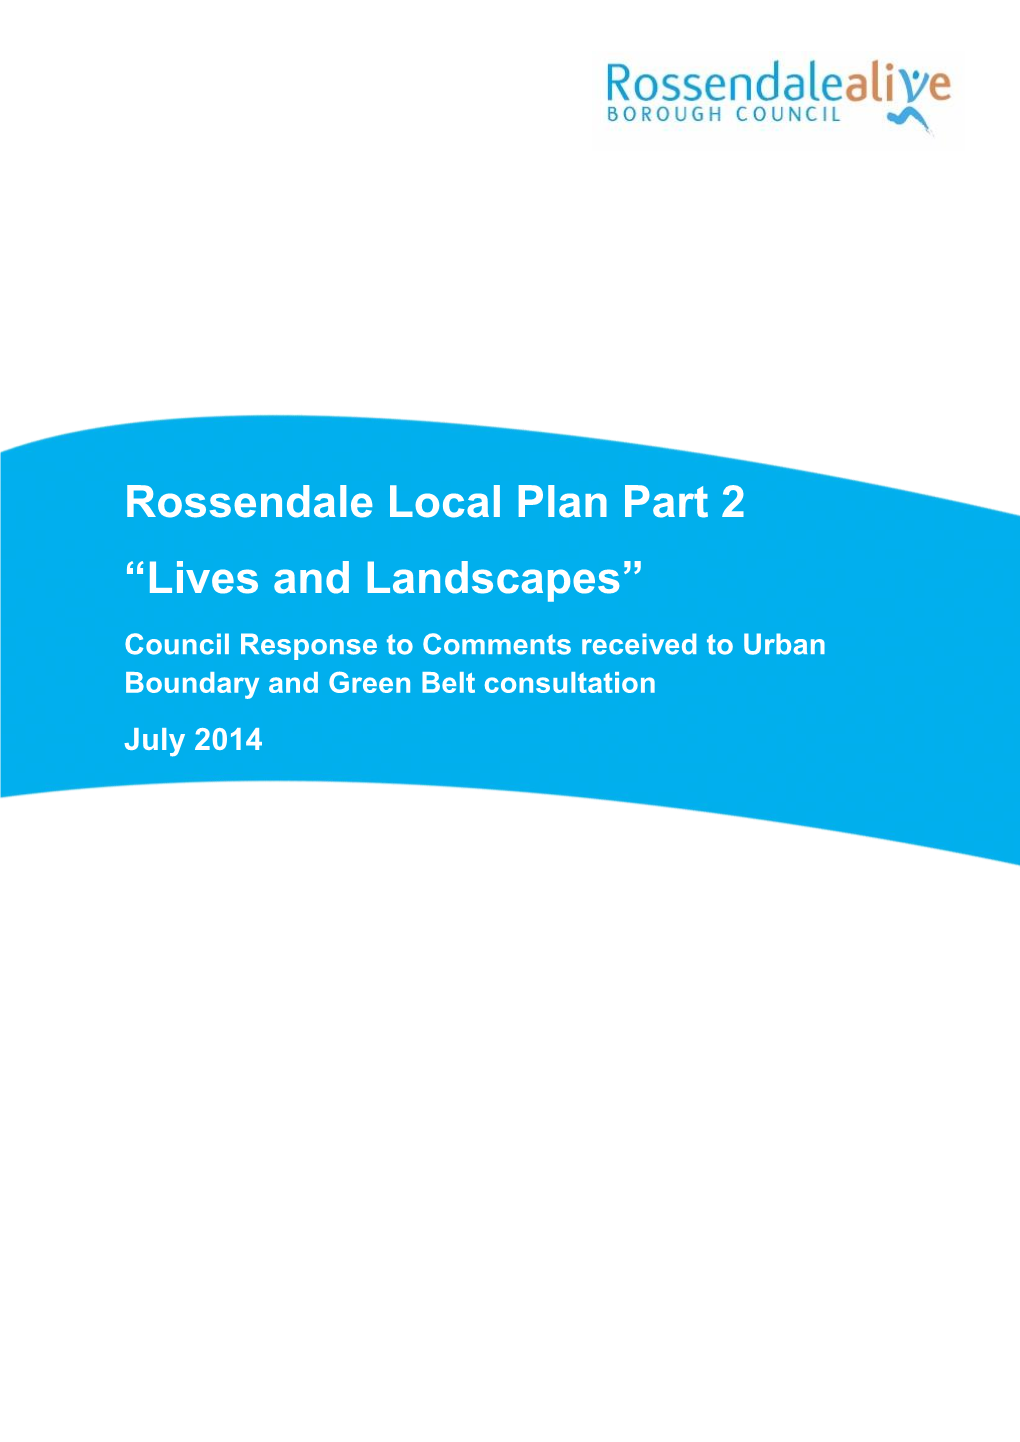 Rossendale Local Plan Part 2 “Lives and Landscapes” Council Response to Comments Received to Urban Boundary and Green Belt Consultation July 2014